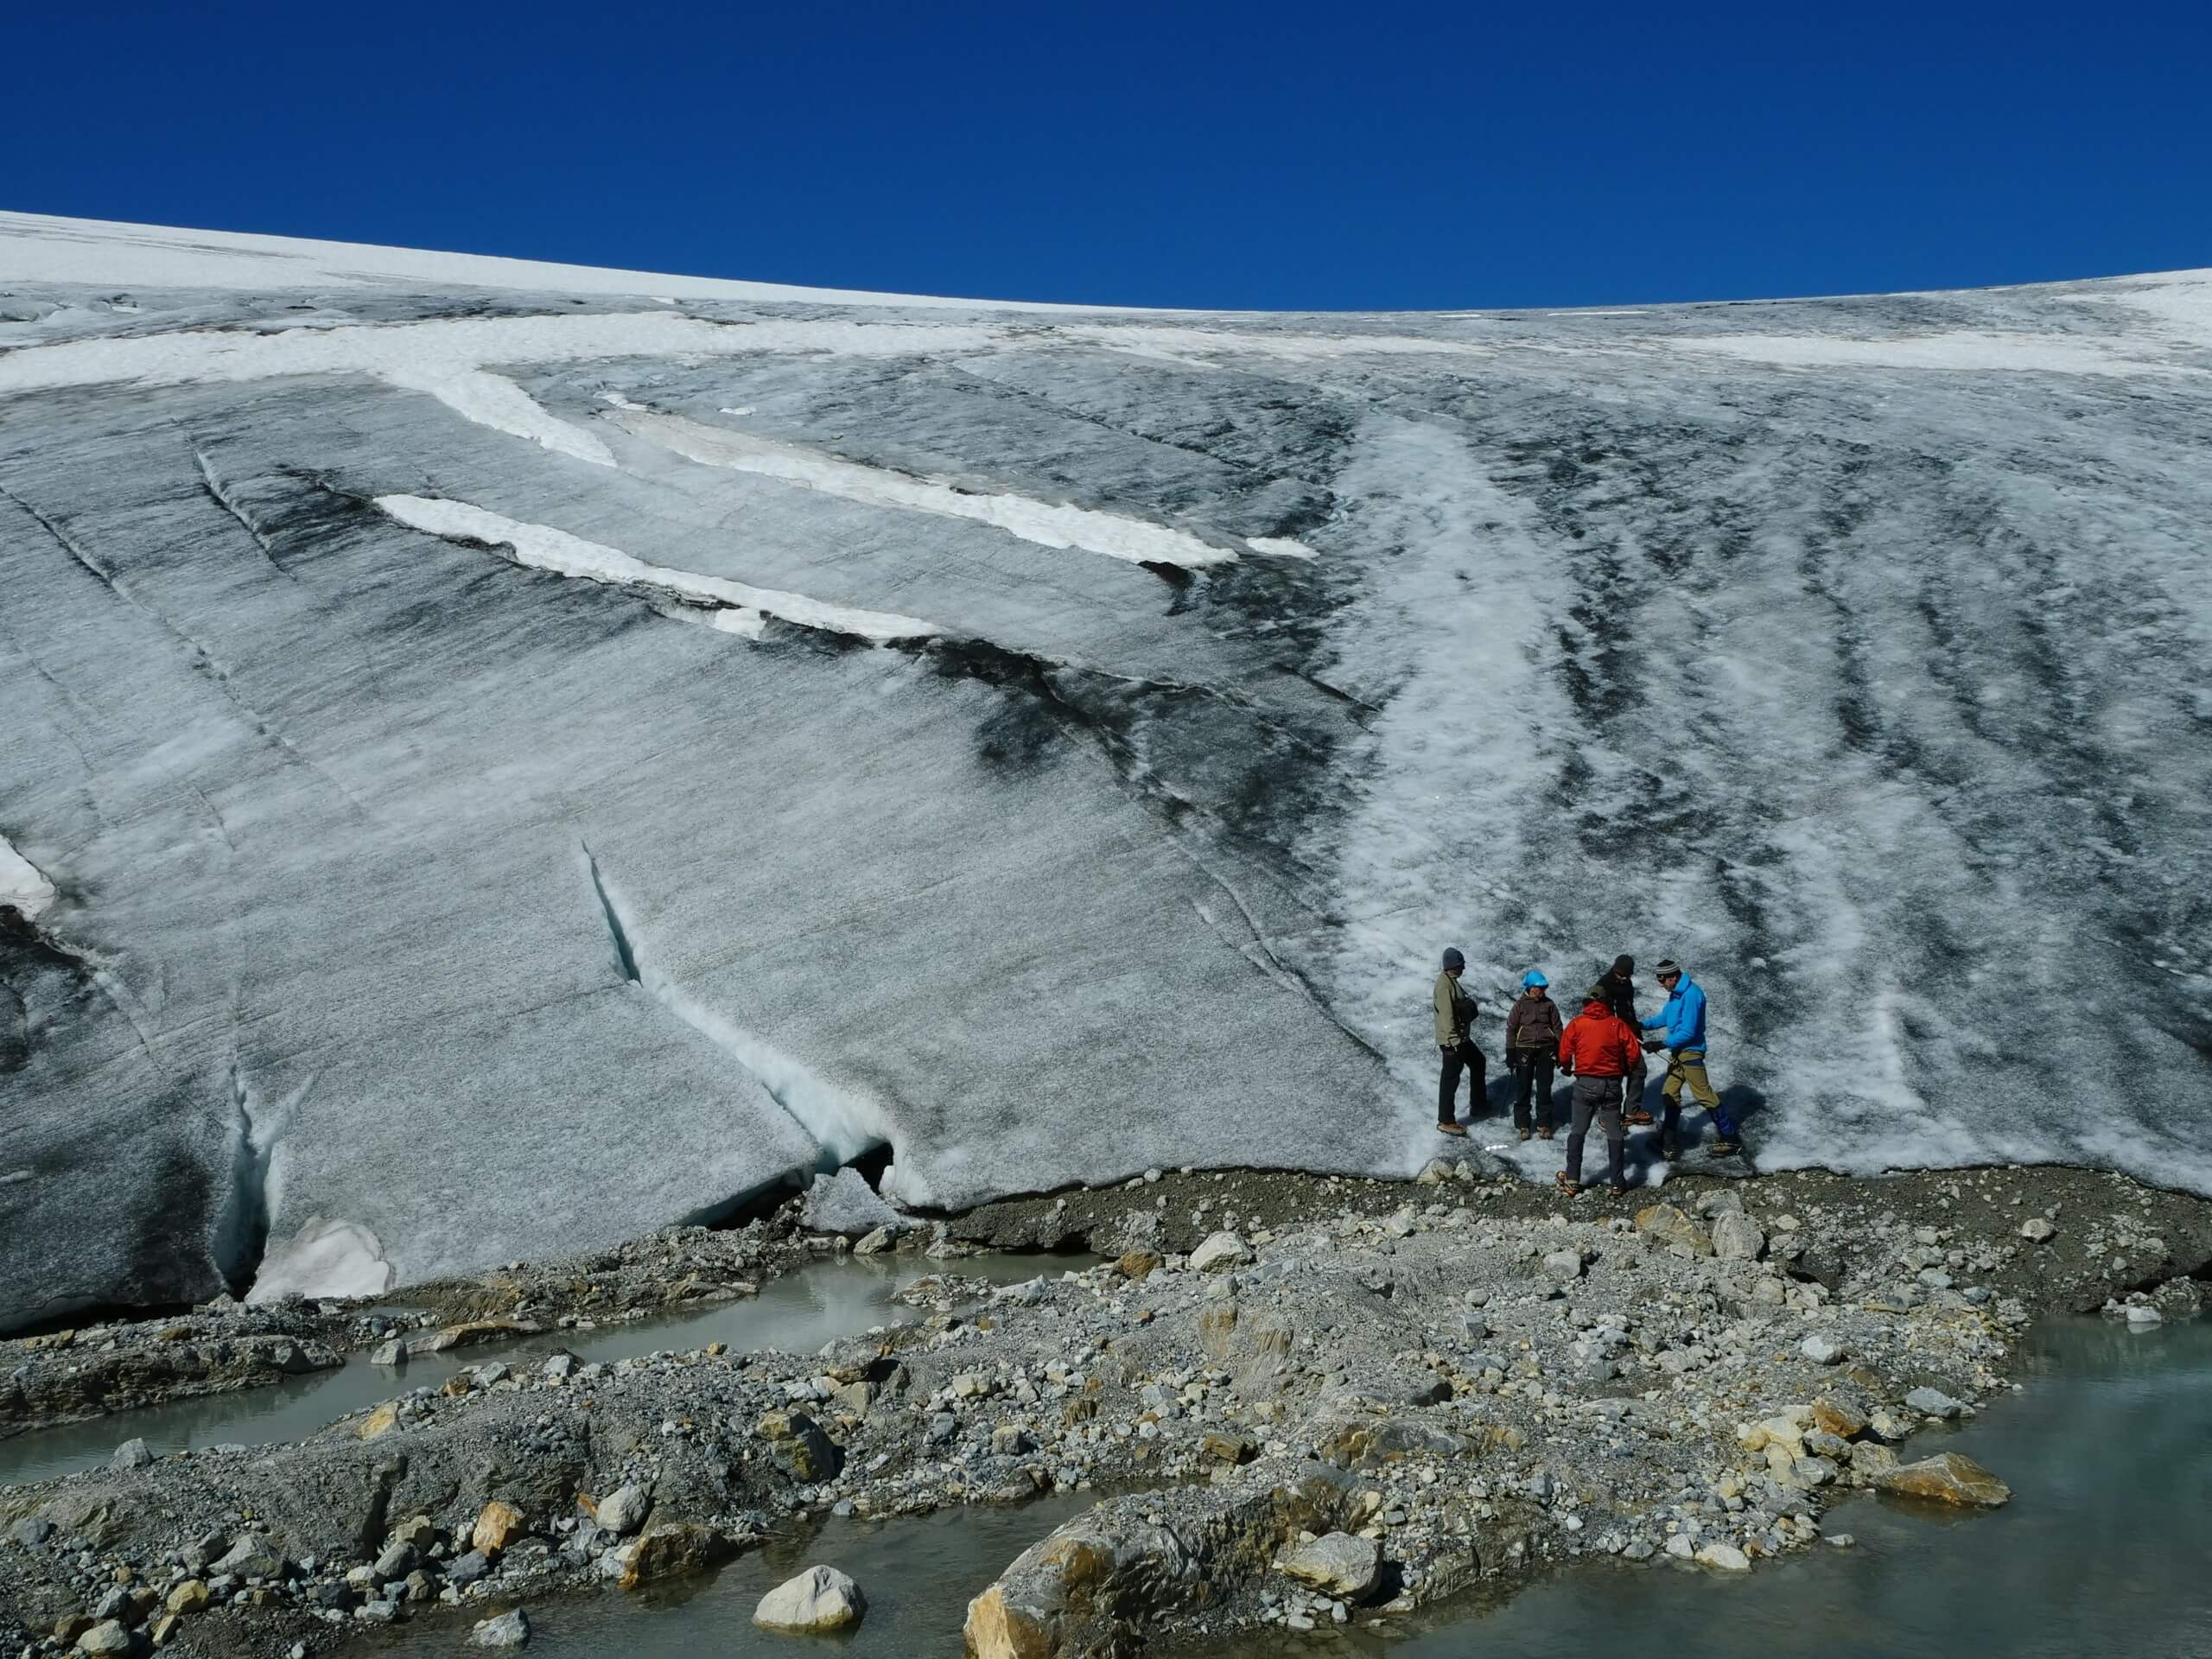 Group of hikers before ascending the Wapta Icefield